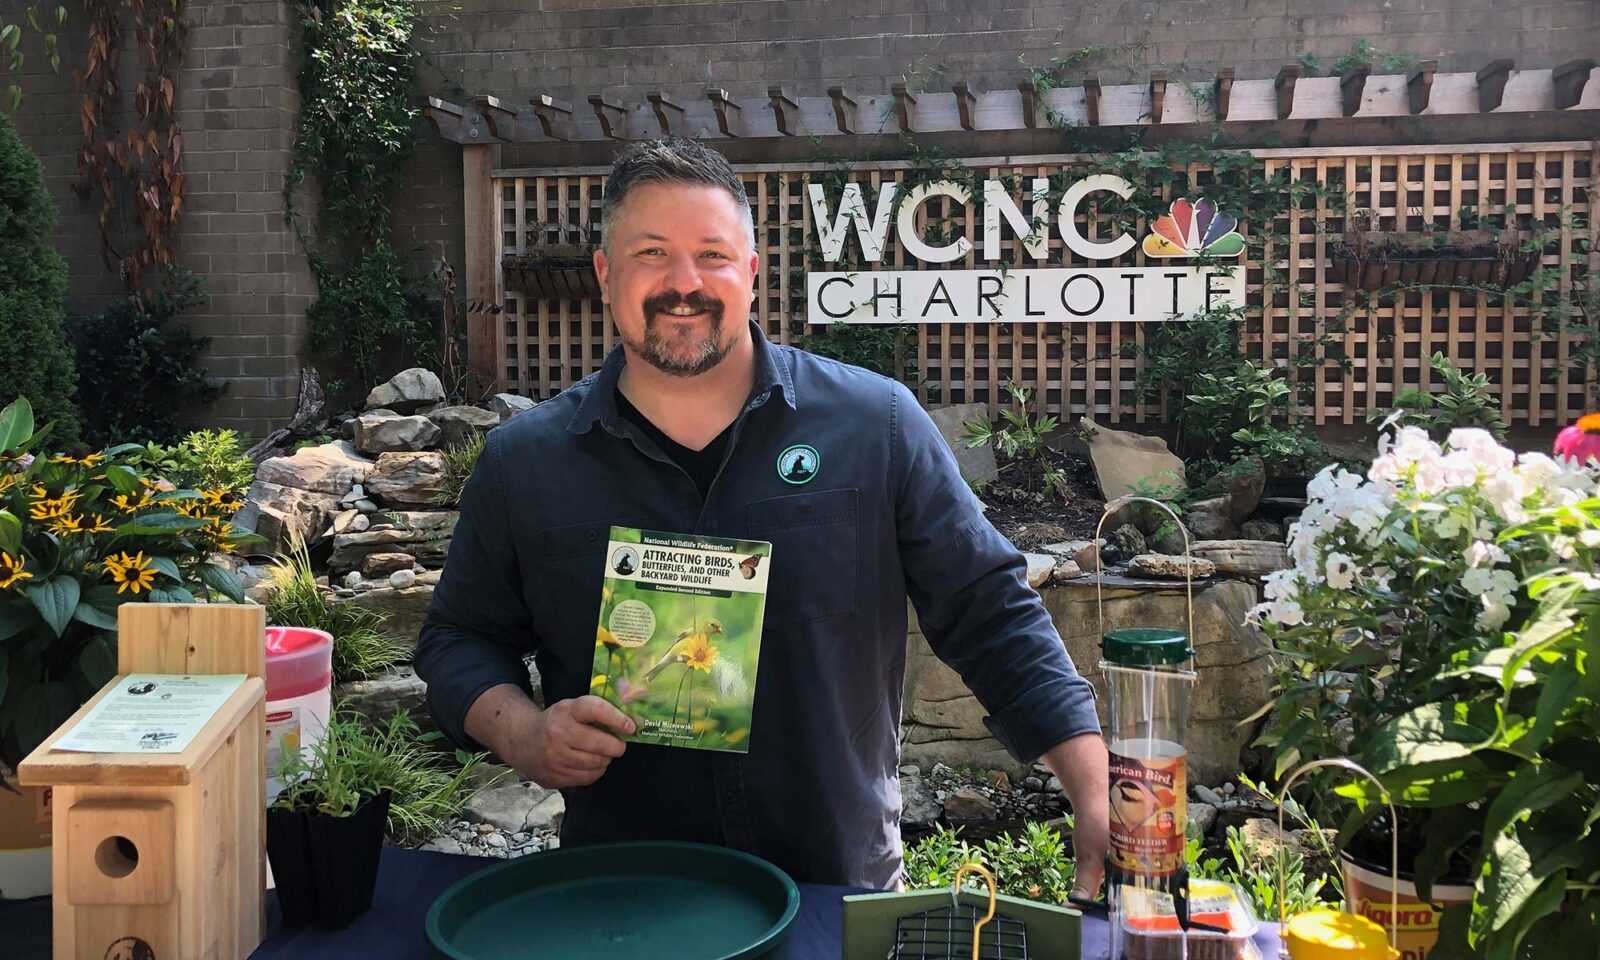 David Mizejewski stands in a garden and holds up his book, "Attracting Birds, Butterflies, and other Backyard Wildlife"